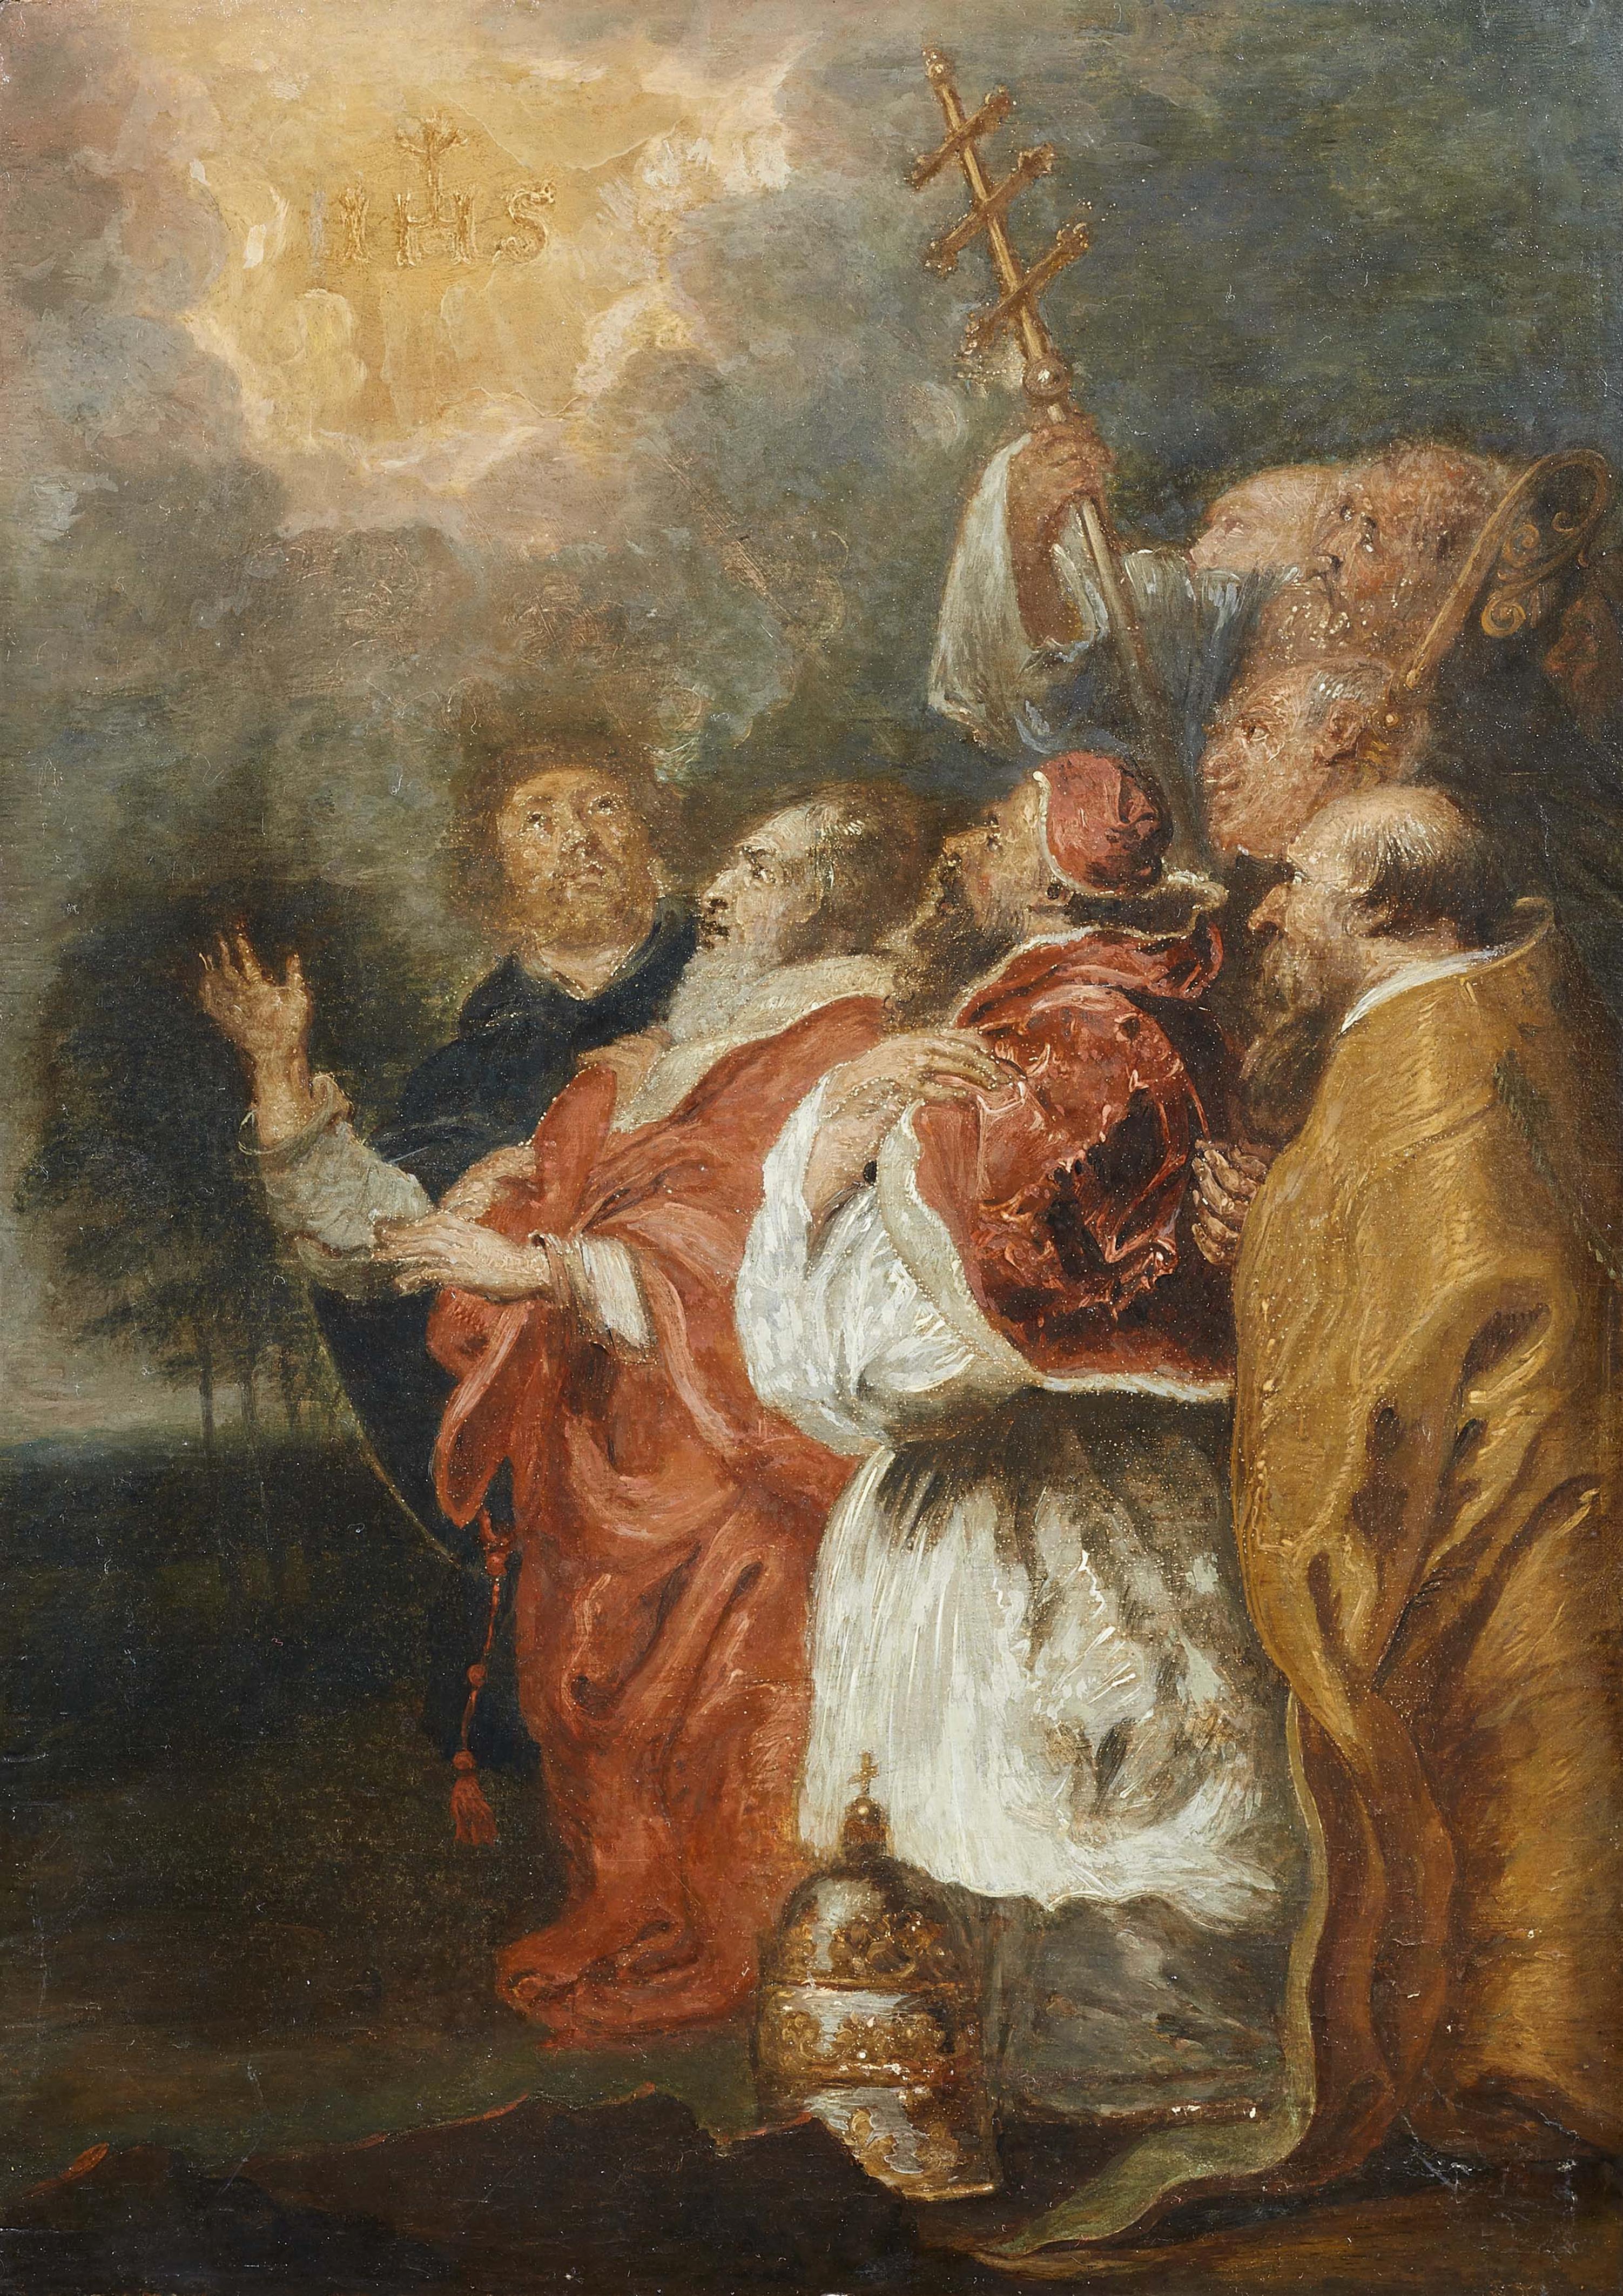 Peter Paul Rubens, circle of - The Ecclesiastical Hierarchy in Adoration of the Eucharist - image-1